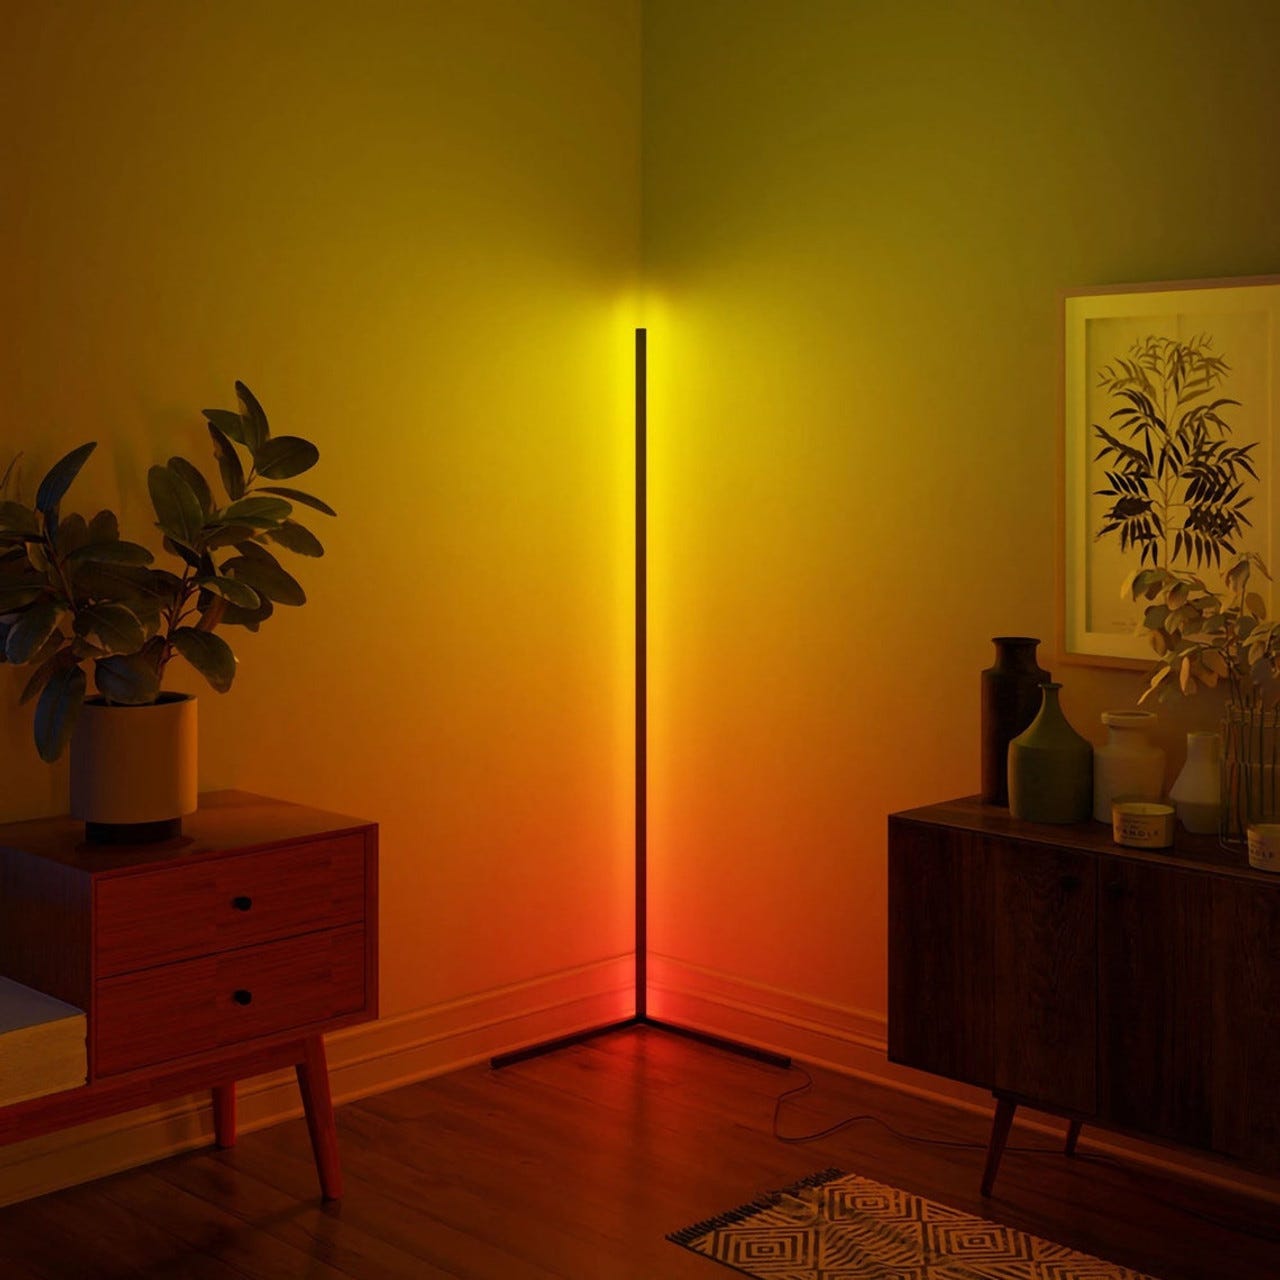 A tall, vertical floor lamp emits a gradient of yellow to red light against a room corner, alongside furniture and decorative items.